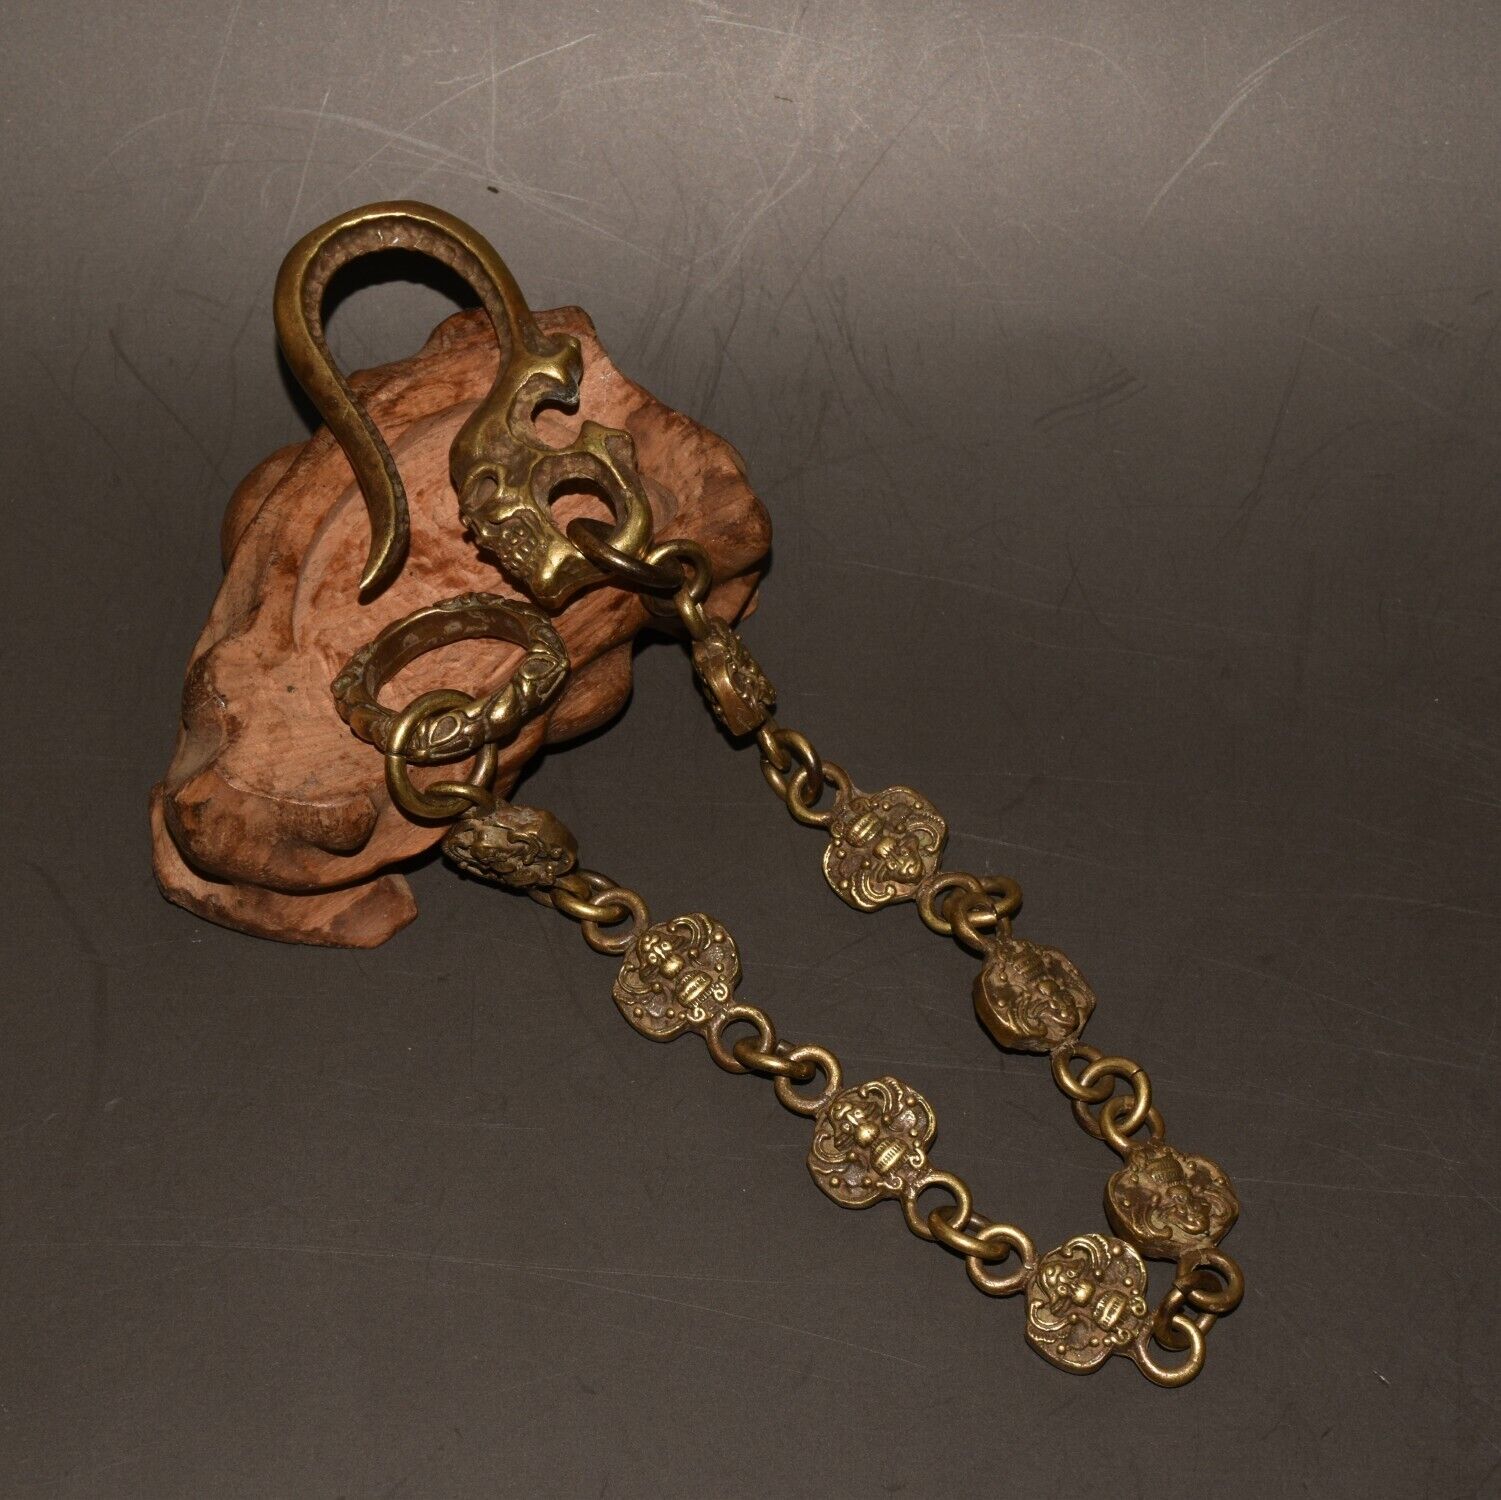 Early Collection of Pure Copper Bat Keychains Chains Pendants and Ornaments